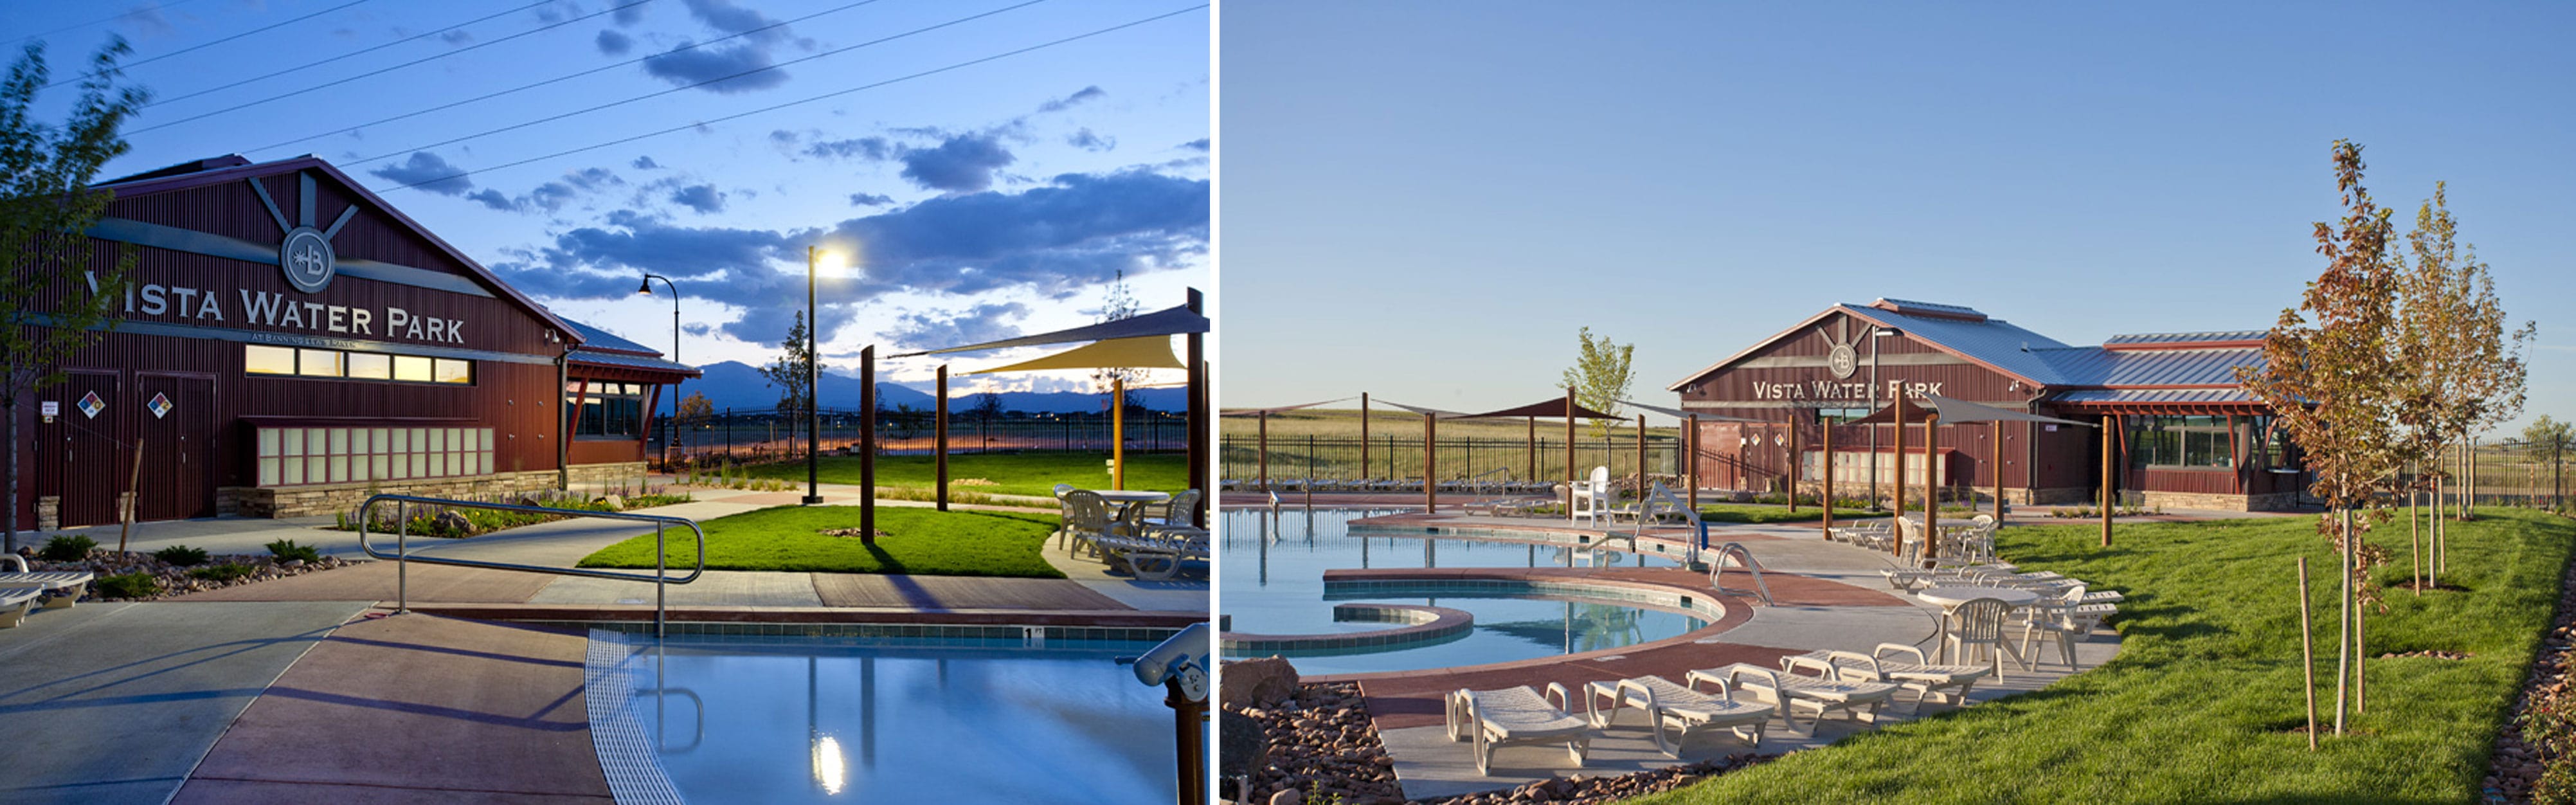 Pool House Architecture architecture solution provided from an architecture firm located in Colorado